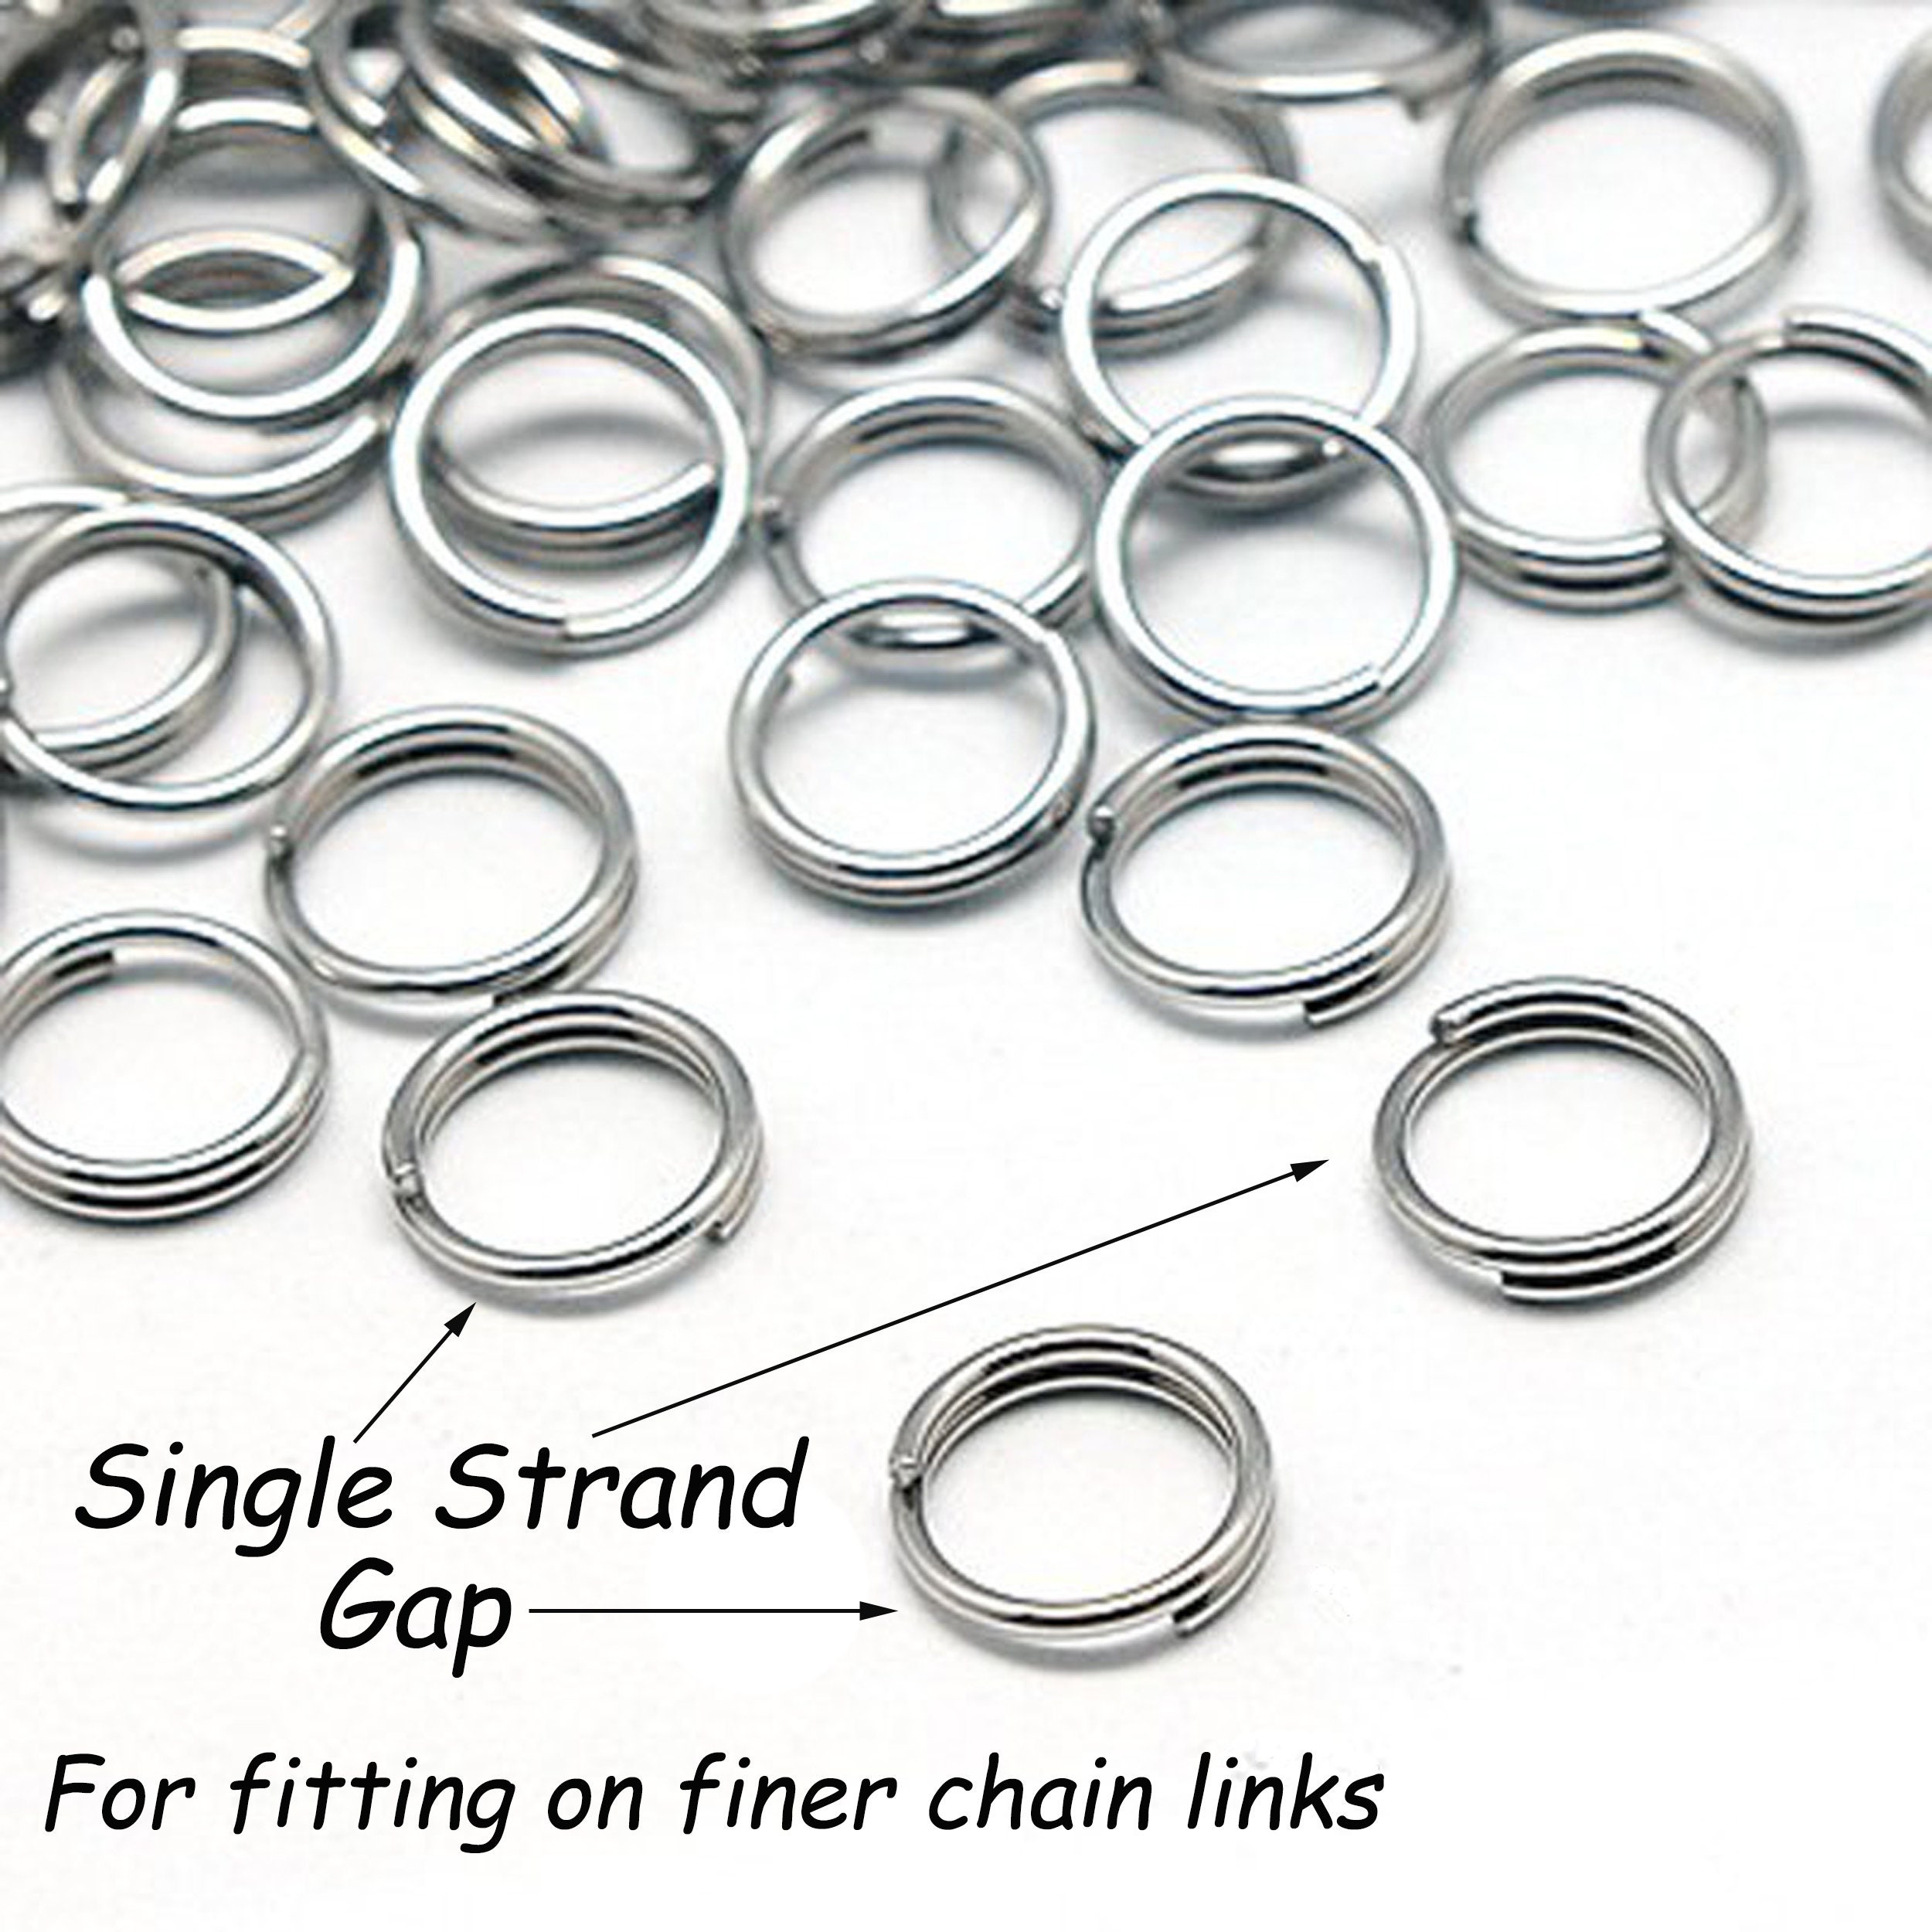 5 Mm Stainless Steel Split Rings Non-tarnish Very Strong 100 Pc. 